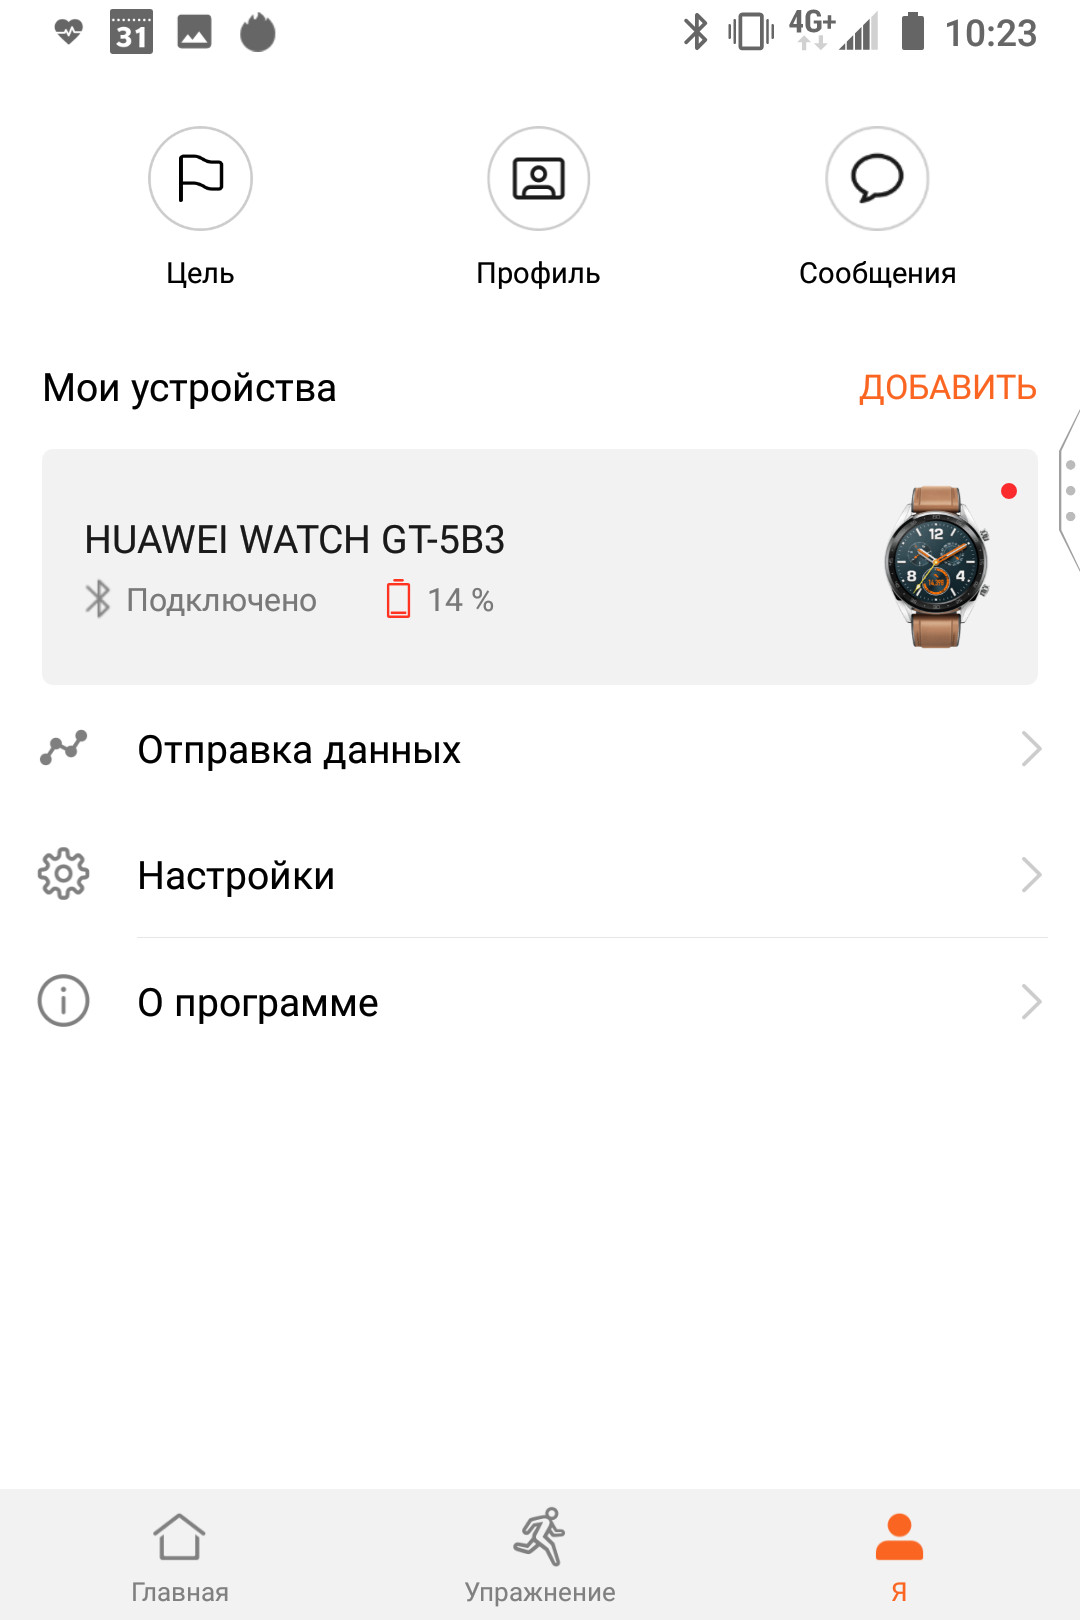  Обзор Band 3 Pro и Huawei Watch GT Huawei  - obzor_huawei_watch_gt_i_band_3_pro_chasy_protiv_brasleta_picture39_15